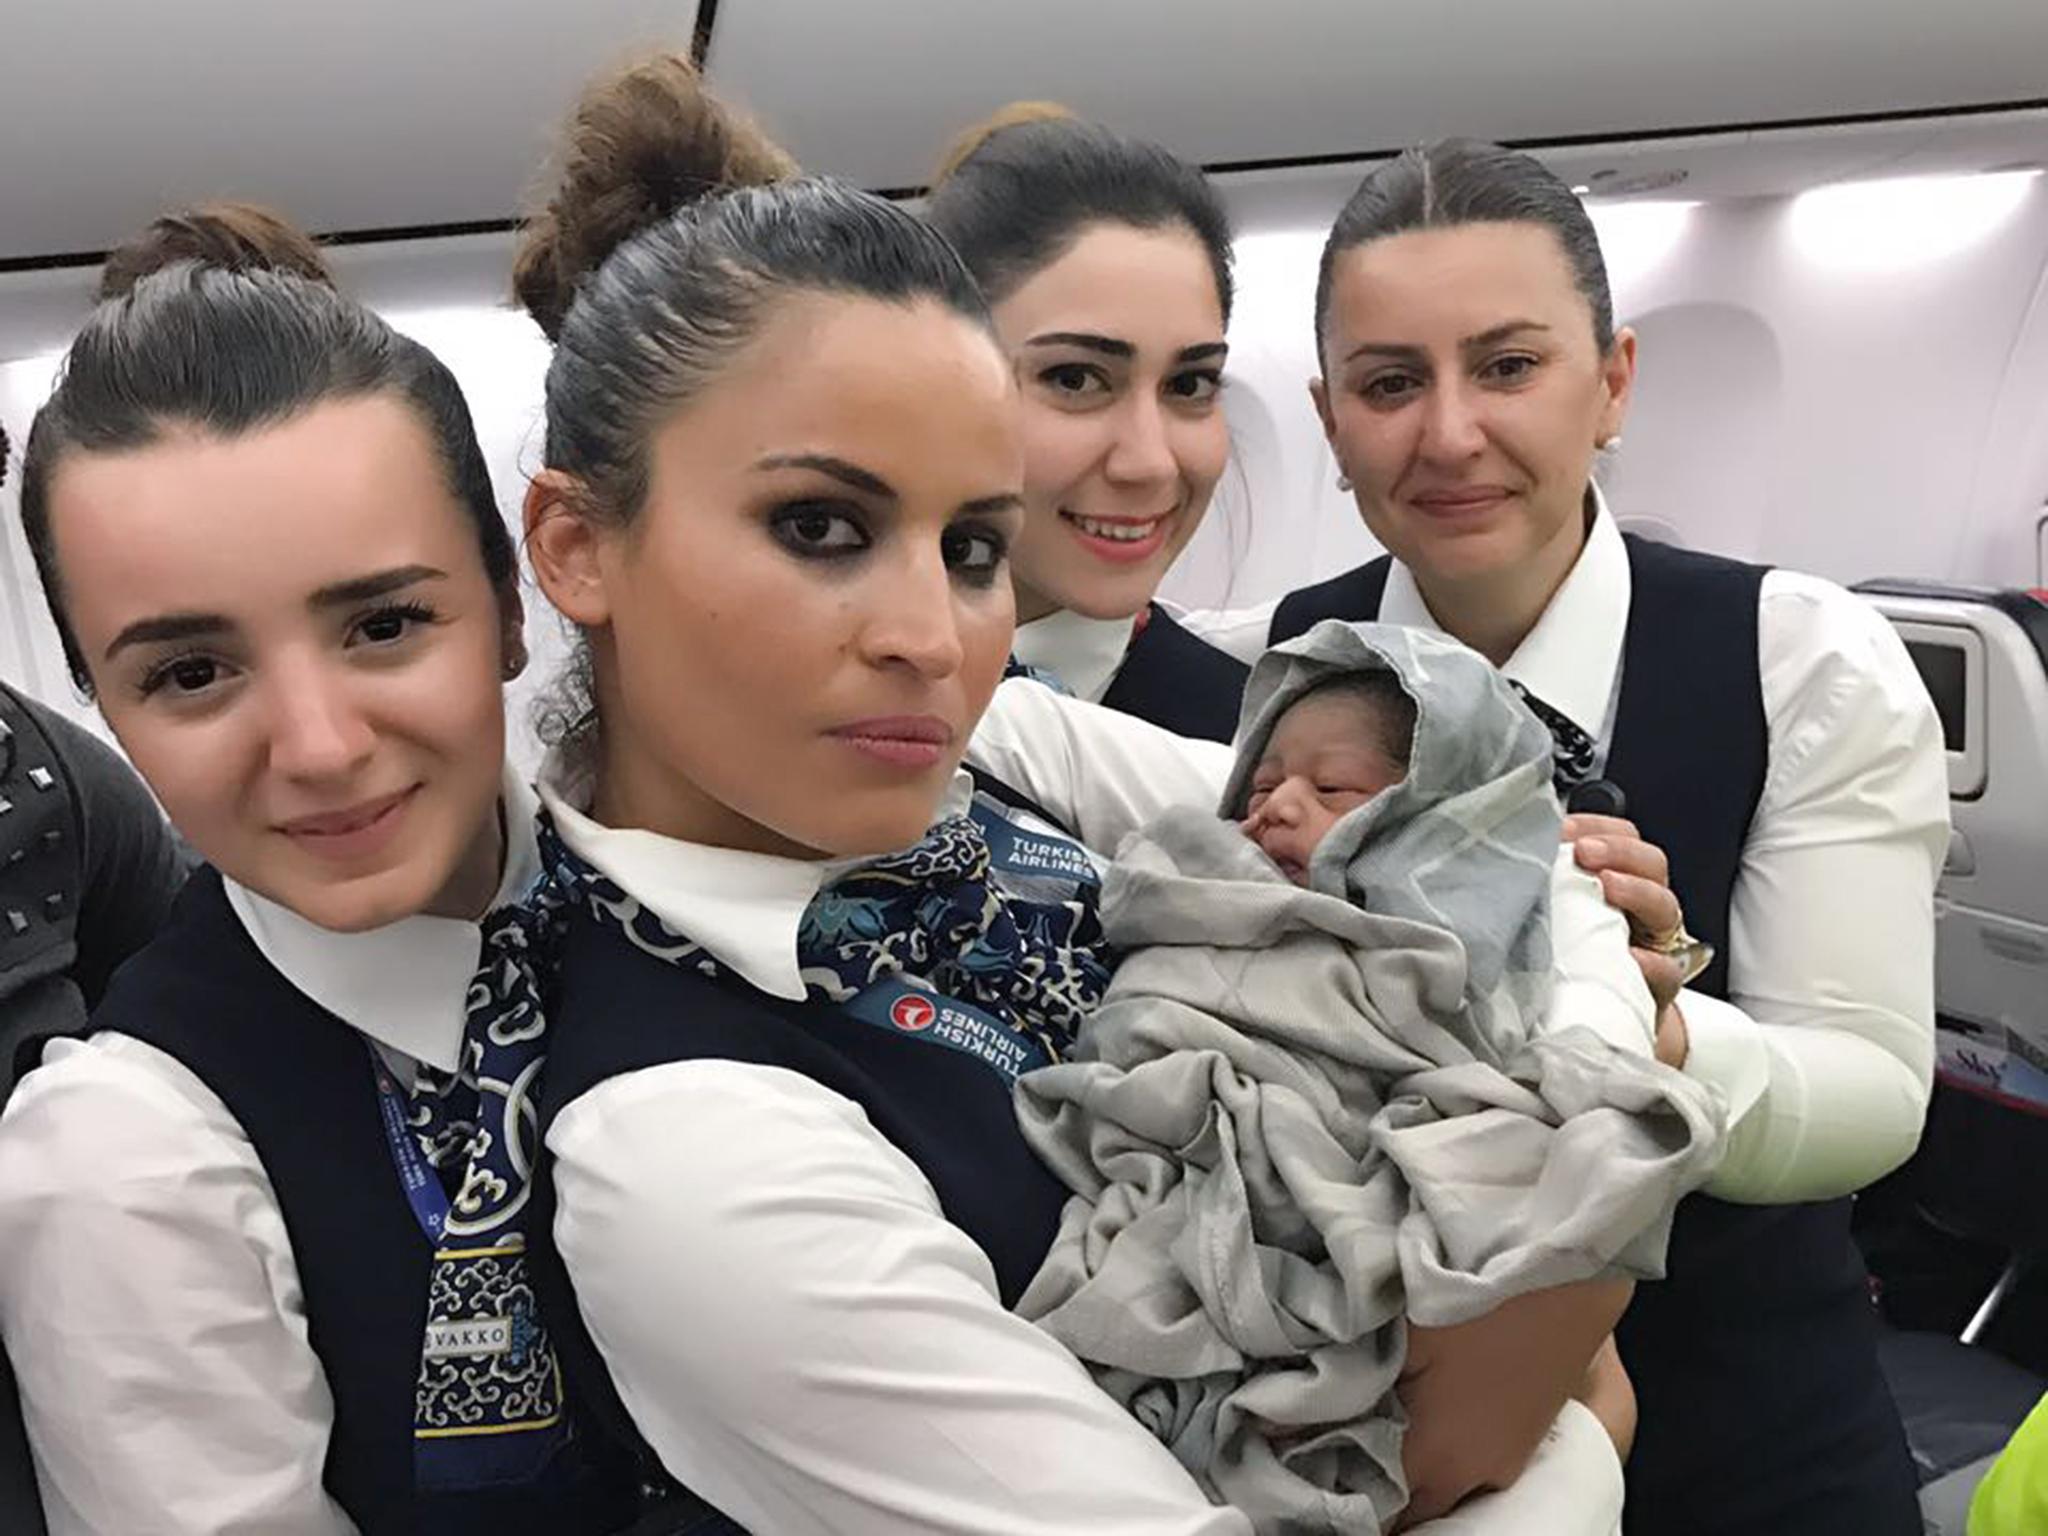 Cabin crew with baby Kadiju who was born 28 weeks premature during a flight